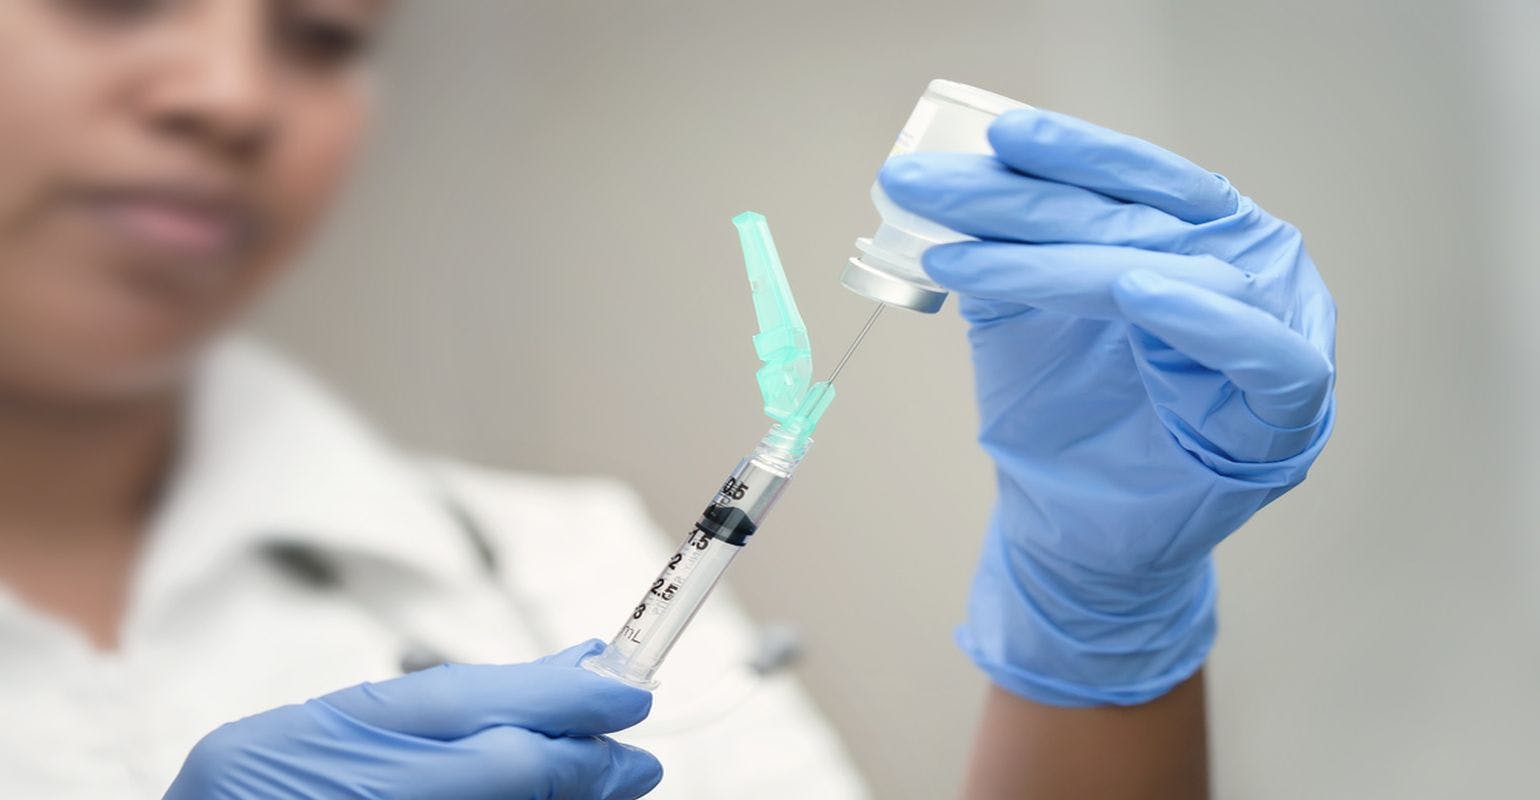 More People Getting the Flu Vaccine This Year, Study Finds